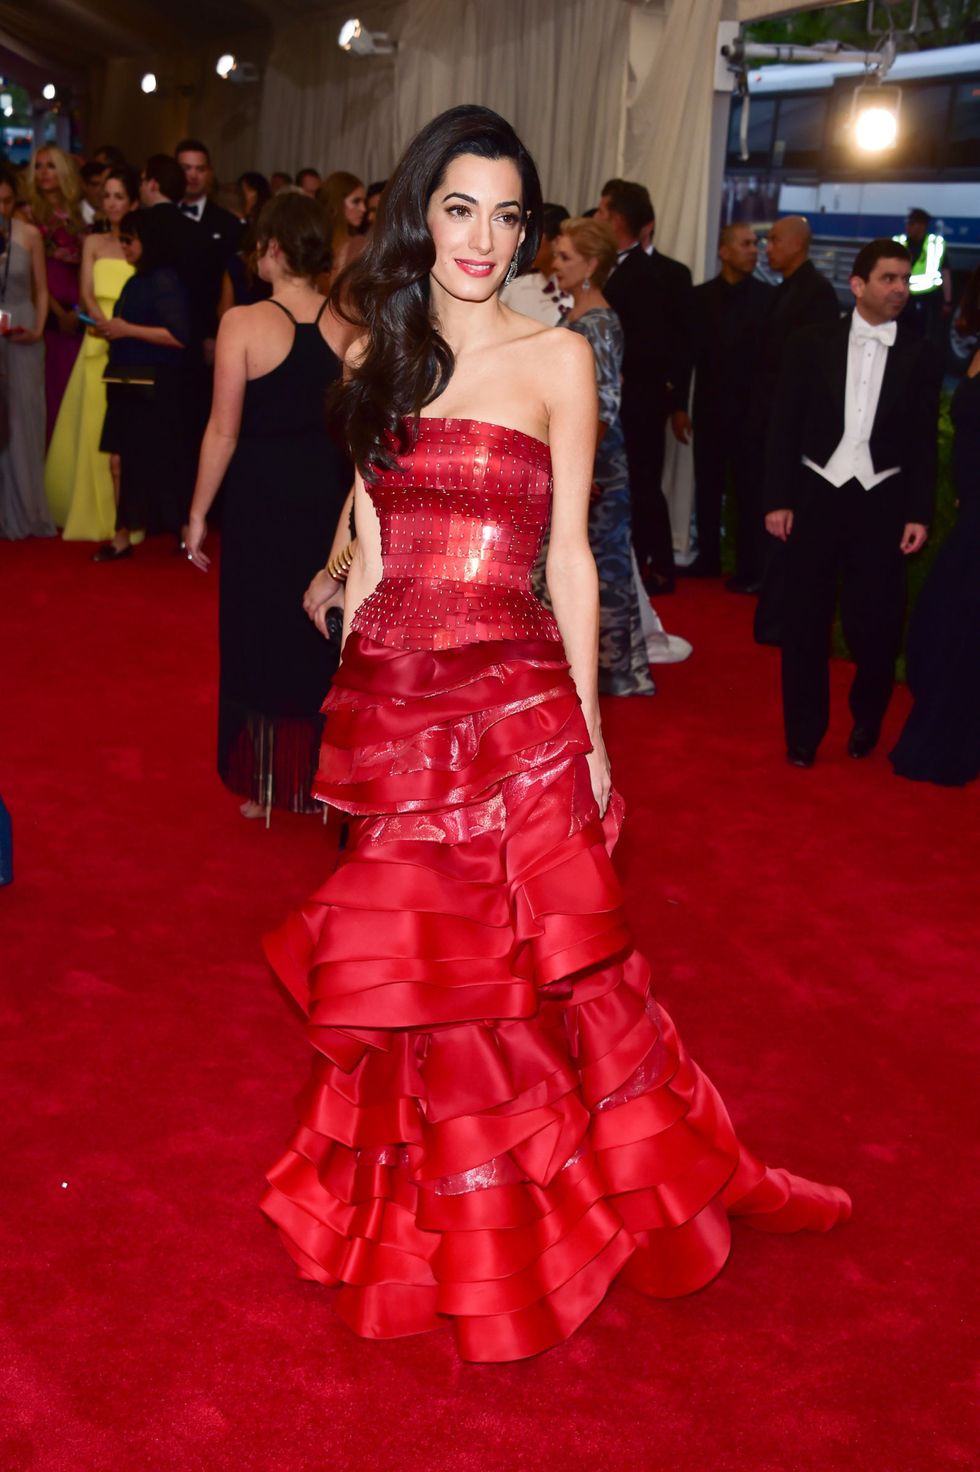 NEW YORK, NY - MAY 04:  Amal Clooney attends the 'China: Through The Looking Glass' Costume Institute Benefit Gala at Metropolitan Museum of Art on May 4, 2015 in New York City.  (Photo by George Pimentel/WireImage)